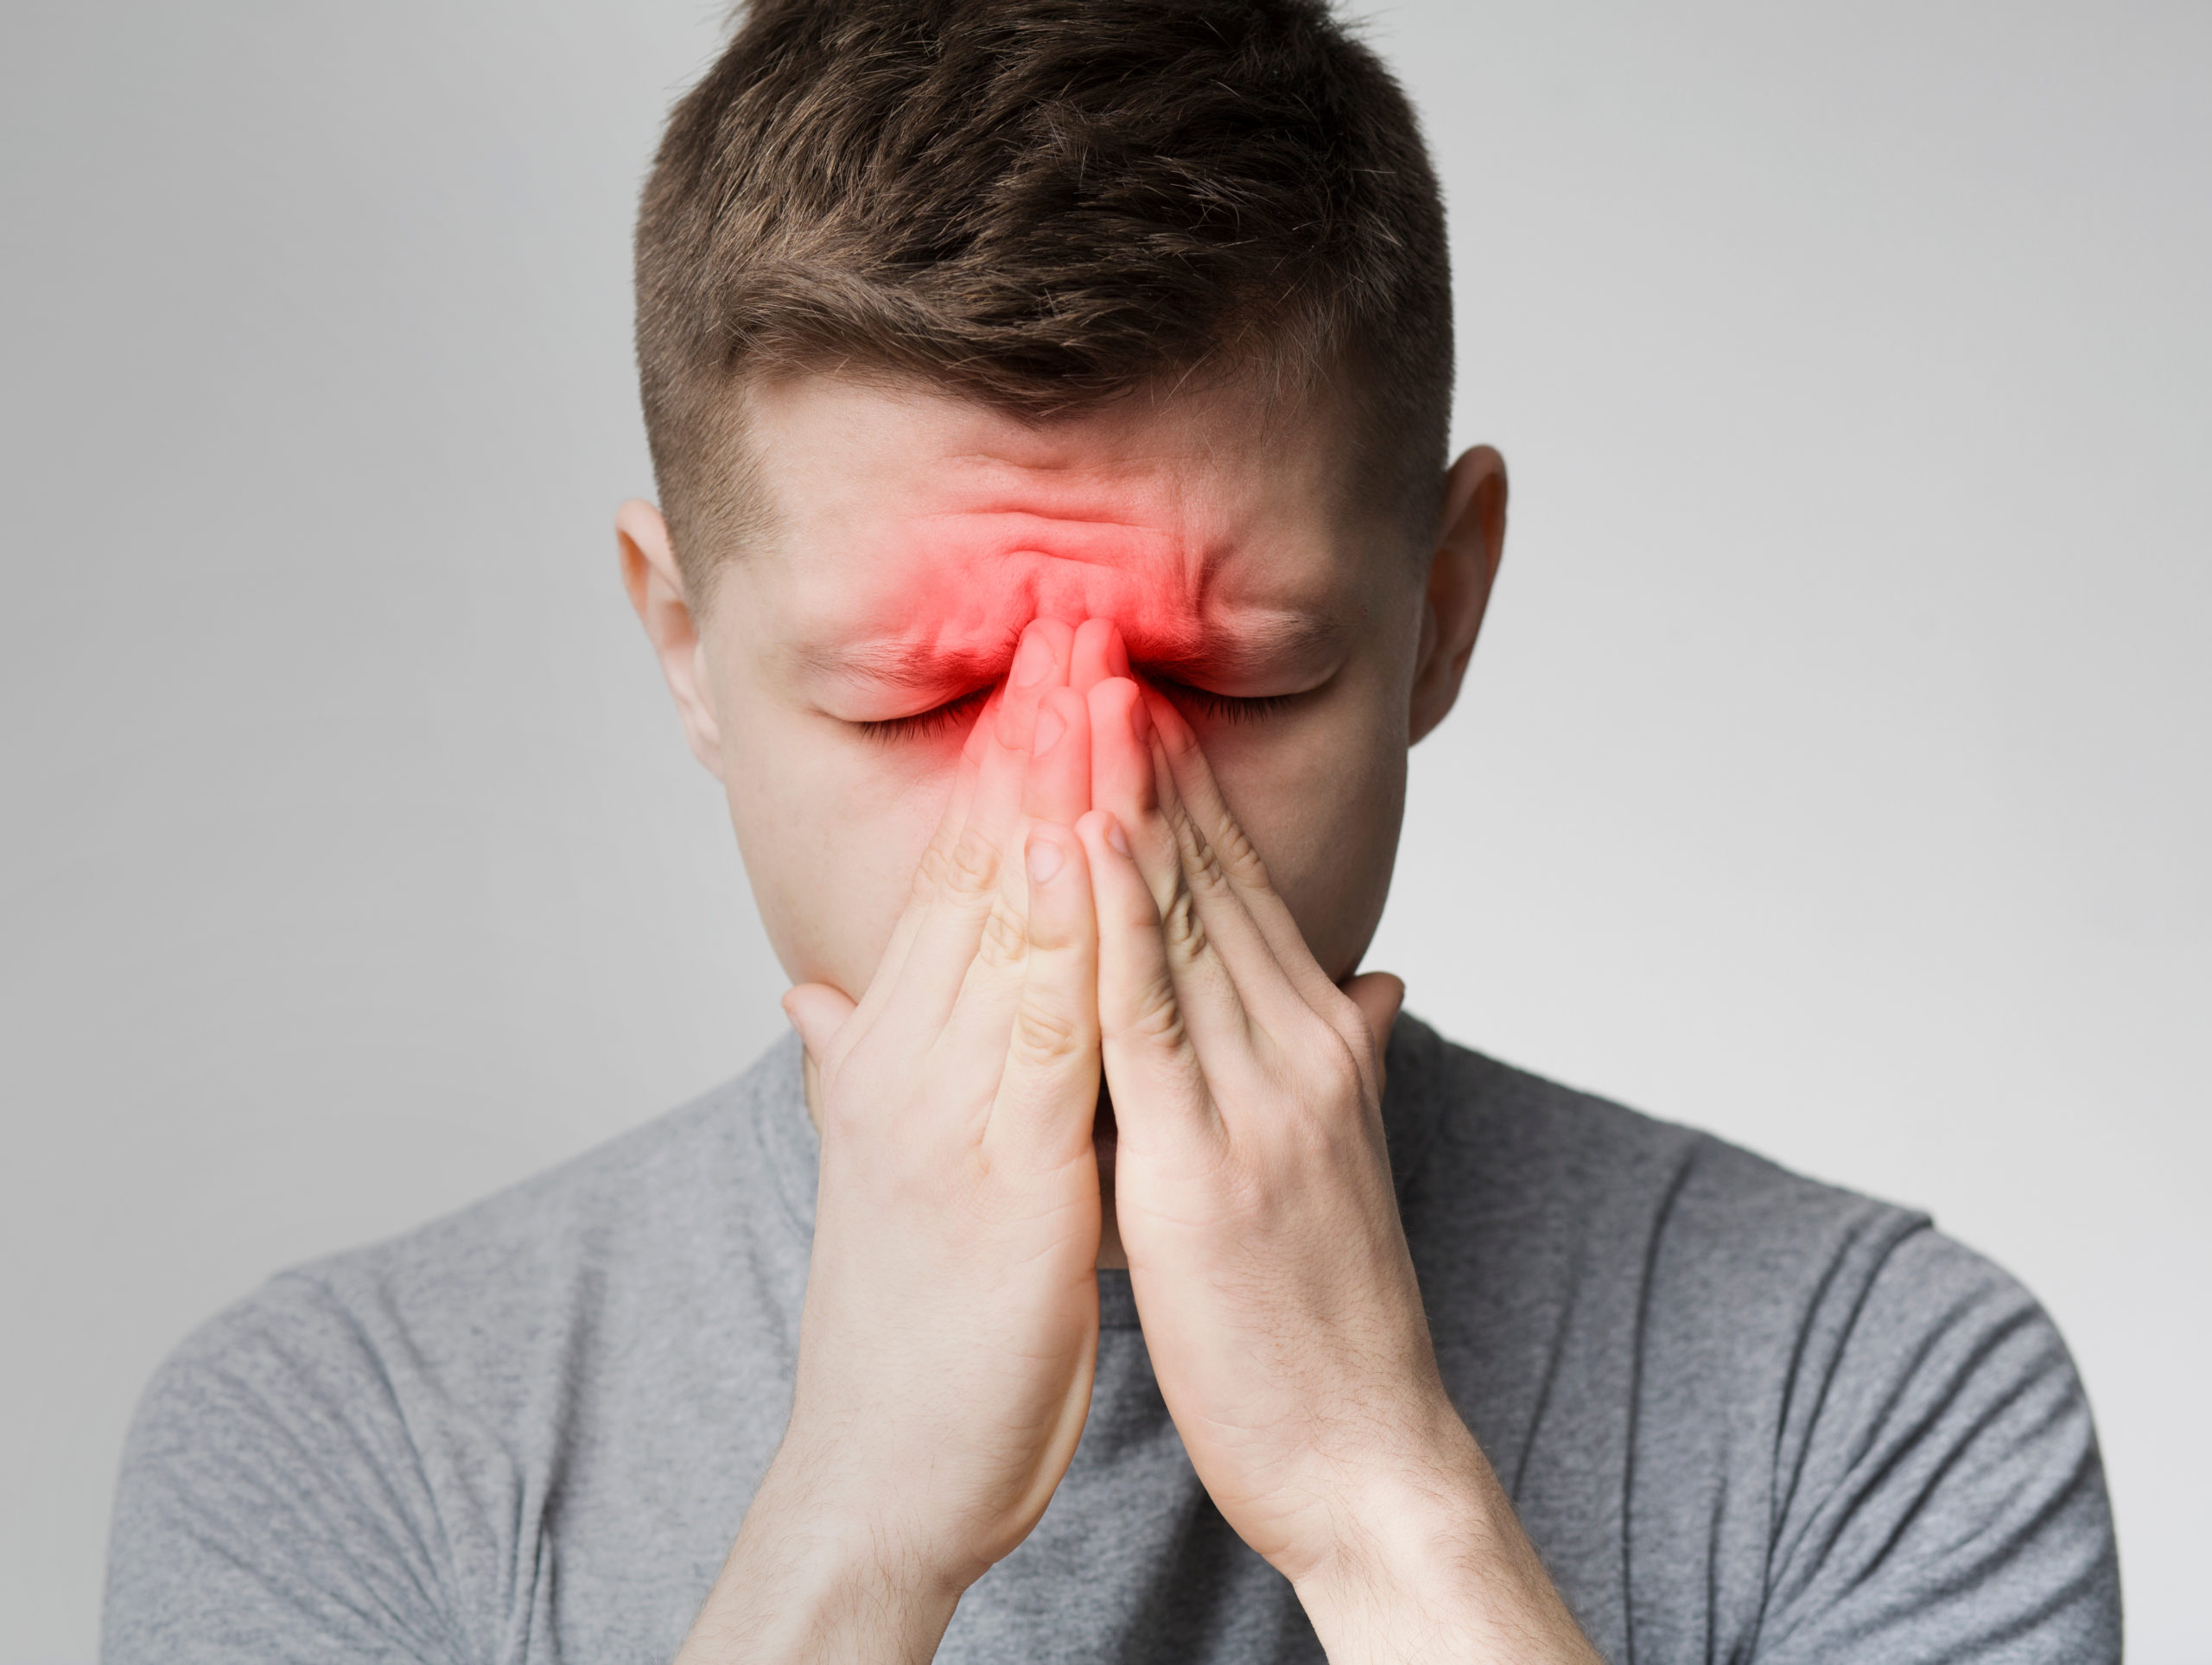 Image of a man clasping his nose between his hands with a red aura indicating pain